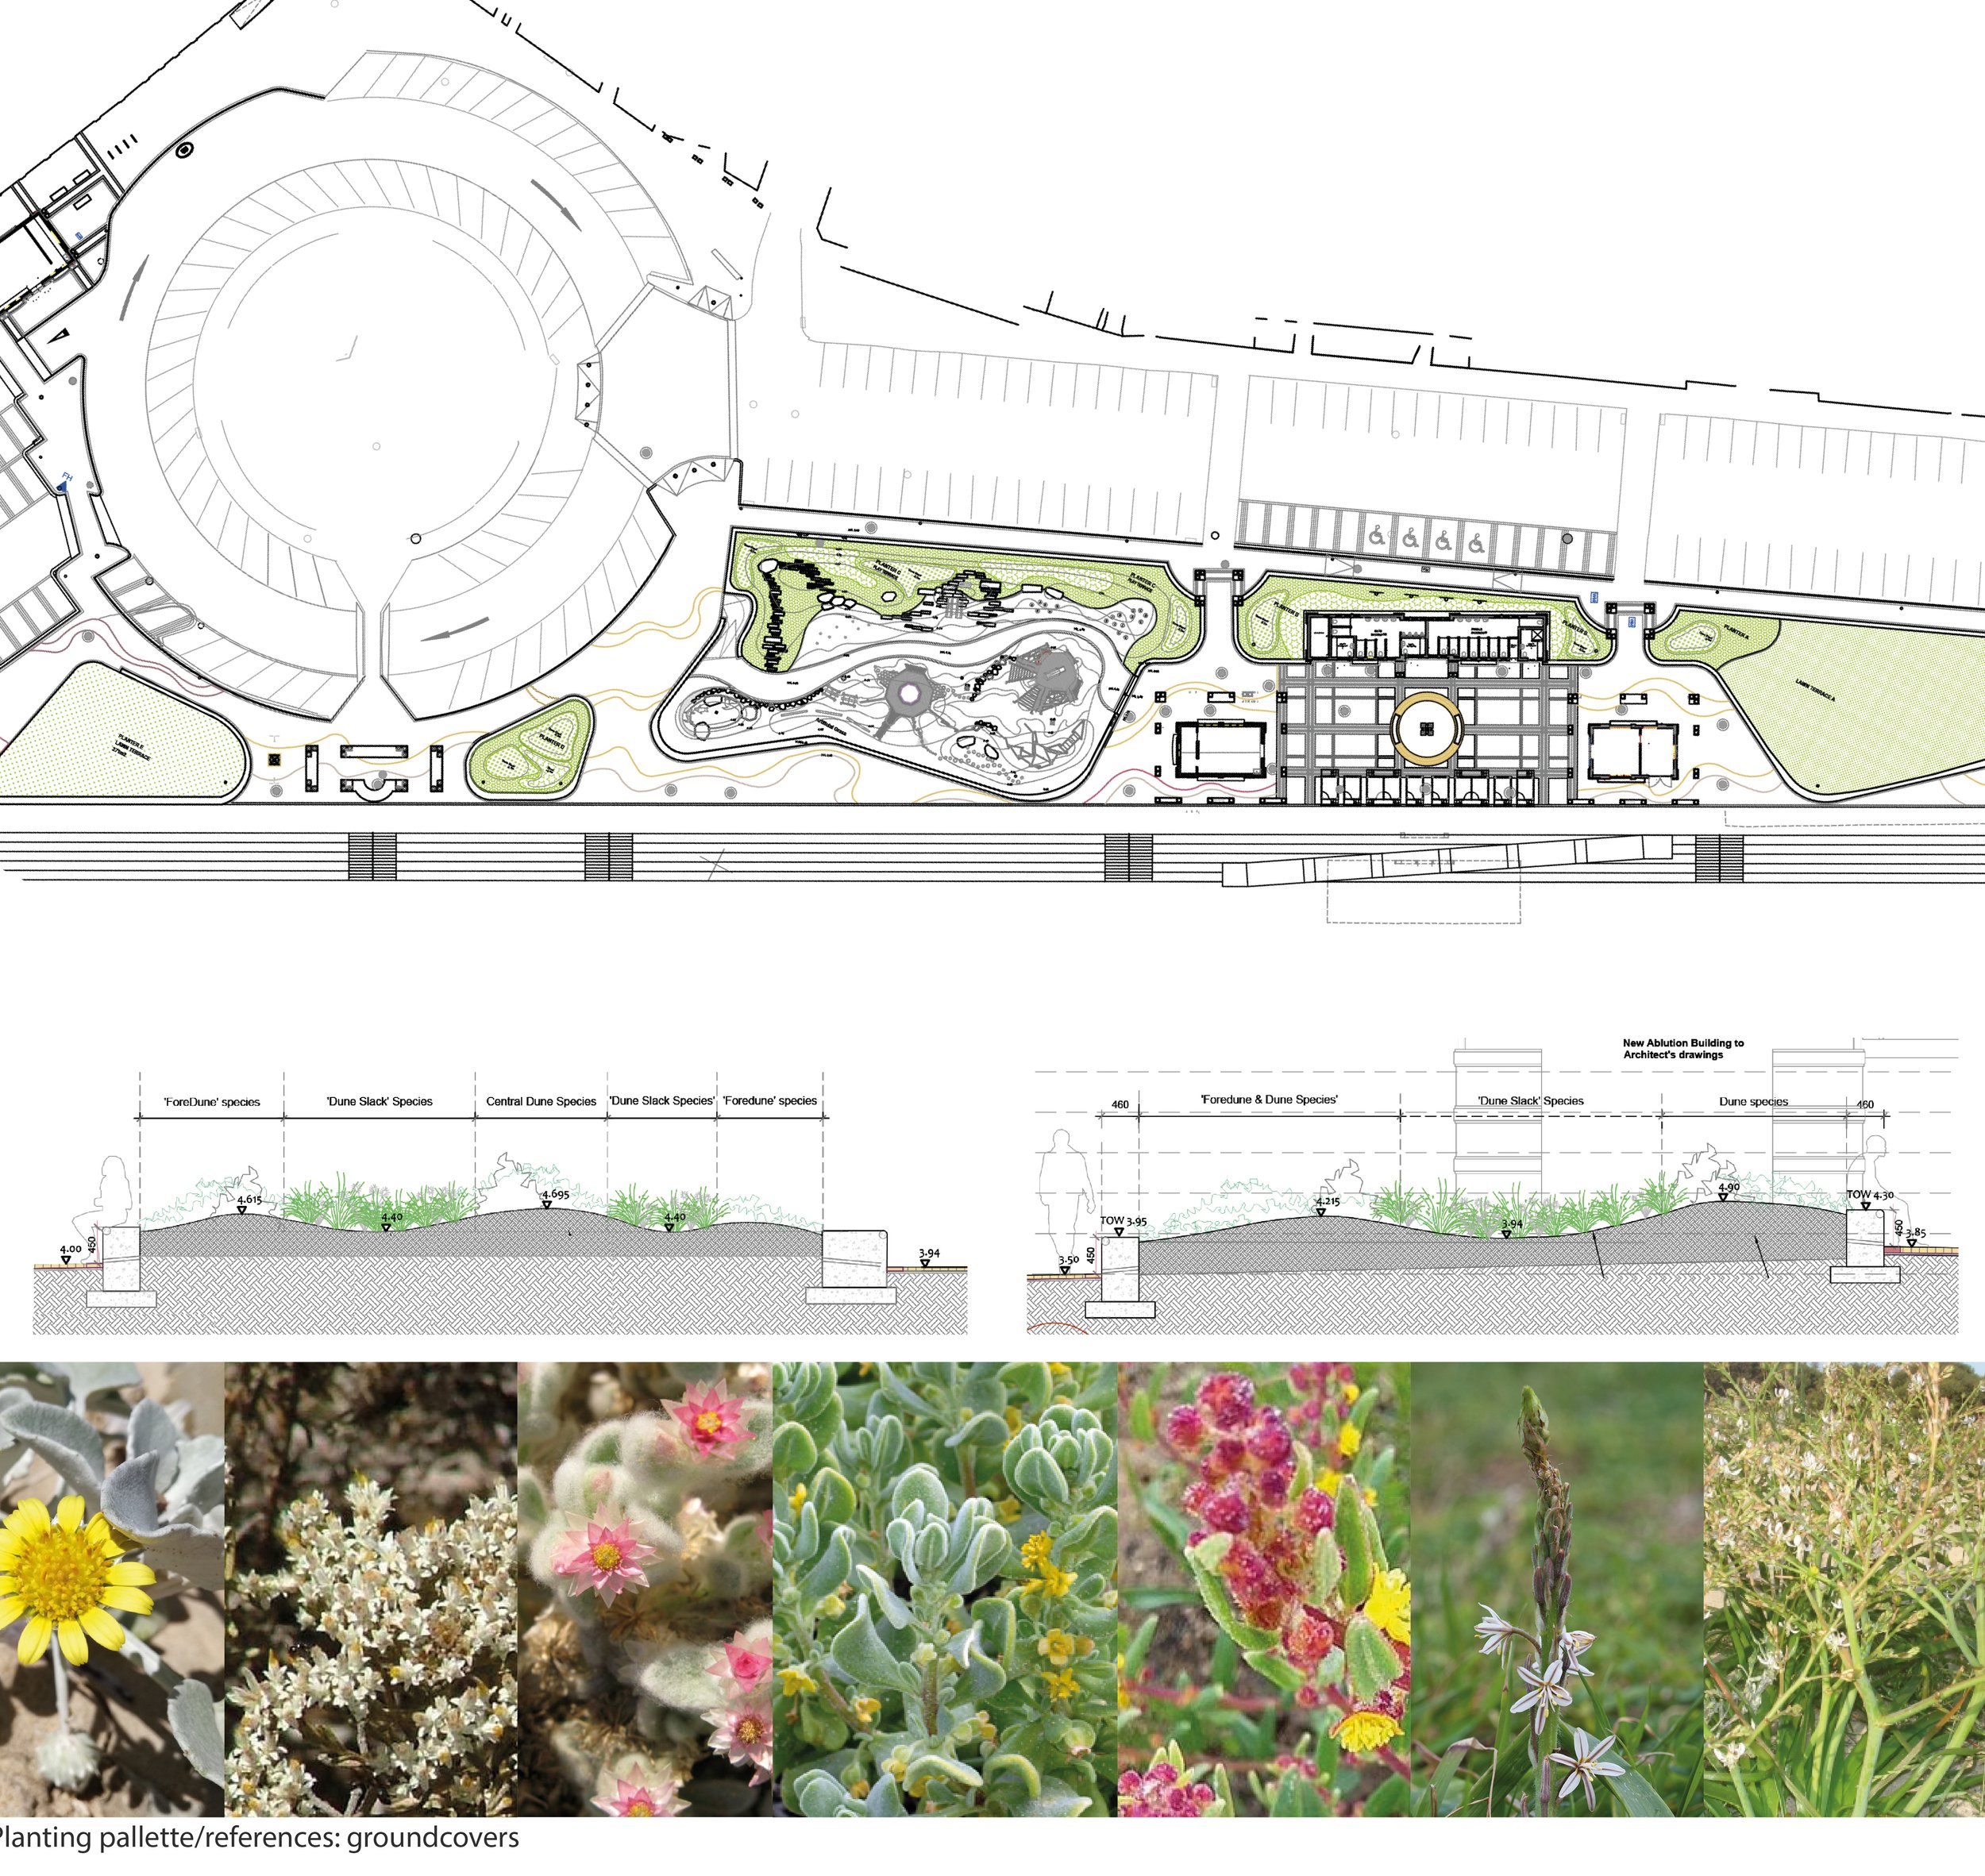  The landscape design stems from the City of Cape Town's Landscape Master Plan of January 2022. Aligned with the city's ethos, the upgrade aims to maximize recreational space, upgrade aging infrastructure, and embrace the area as a cultural landscape